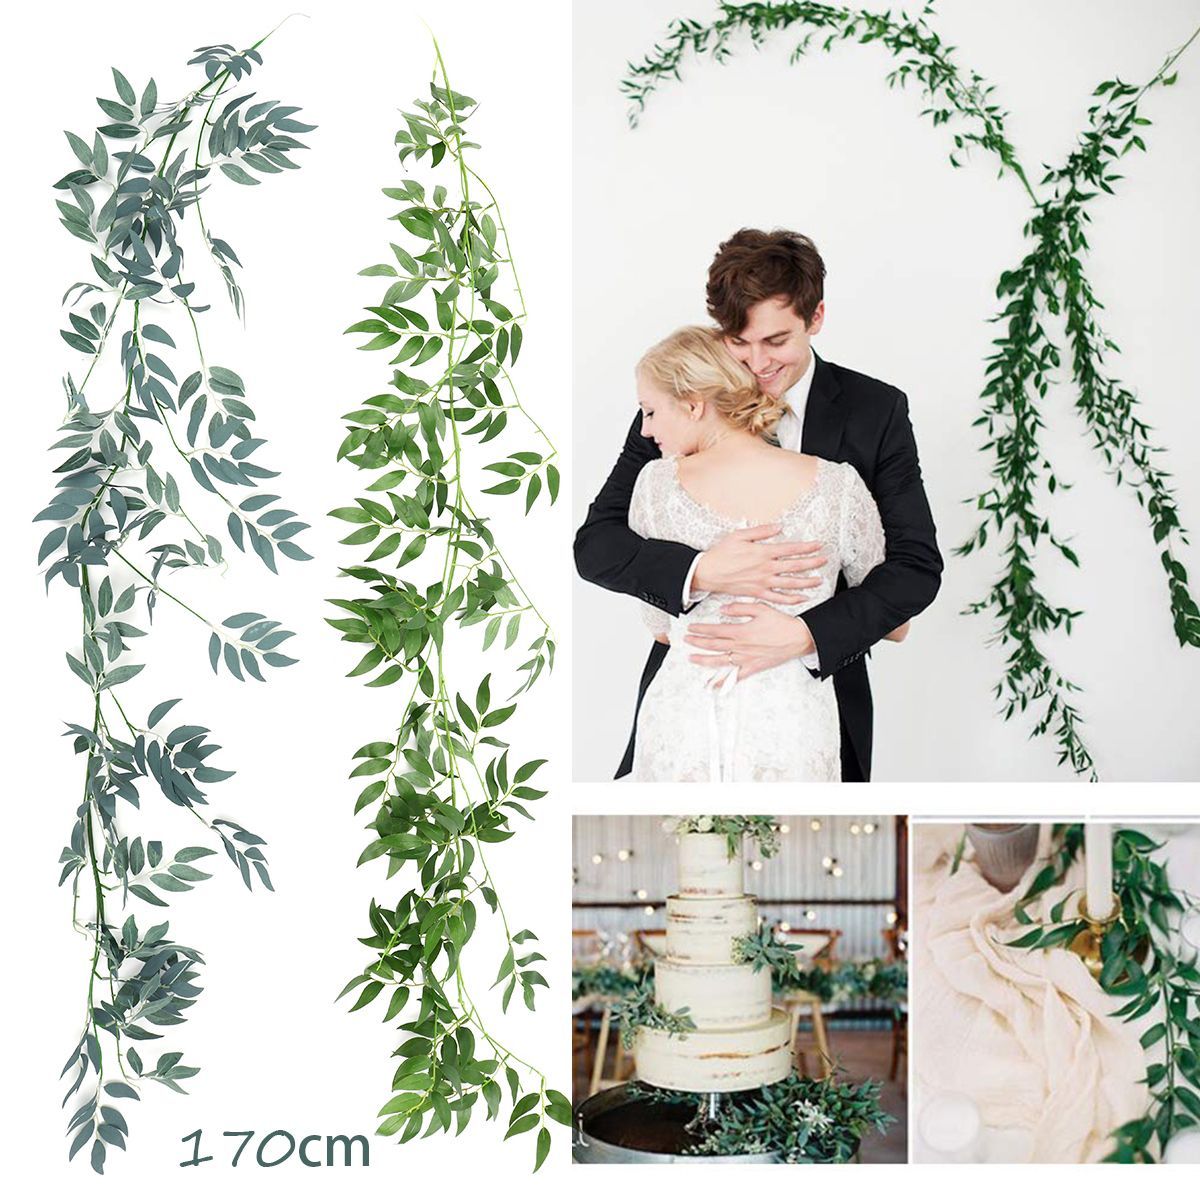 67quot-Artificial-Willow-Vines-Plant-Greenery-Garland-Wreath-Leaves-Hanging-Wedding-Decor-Supplies-1536084